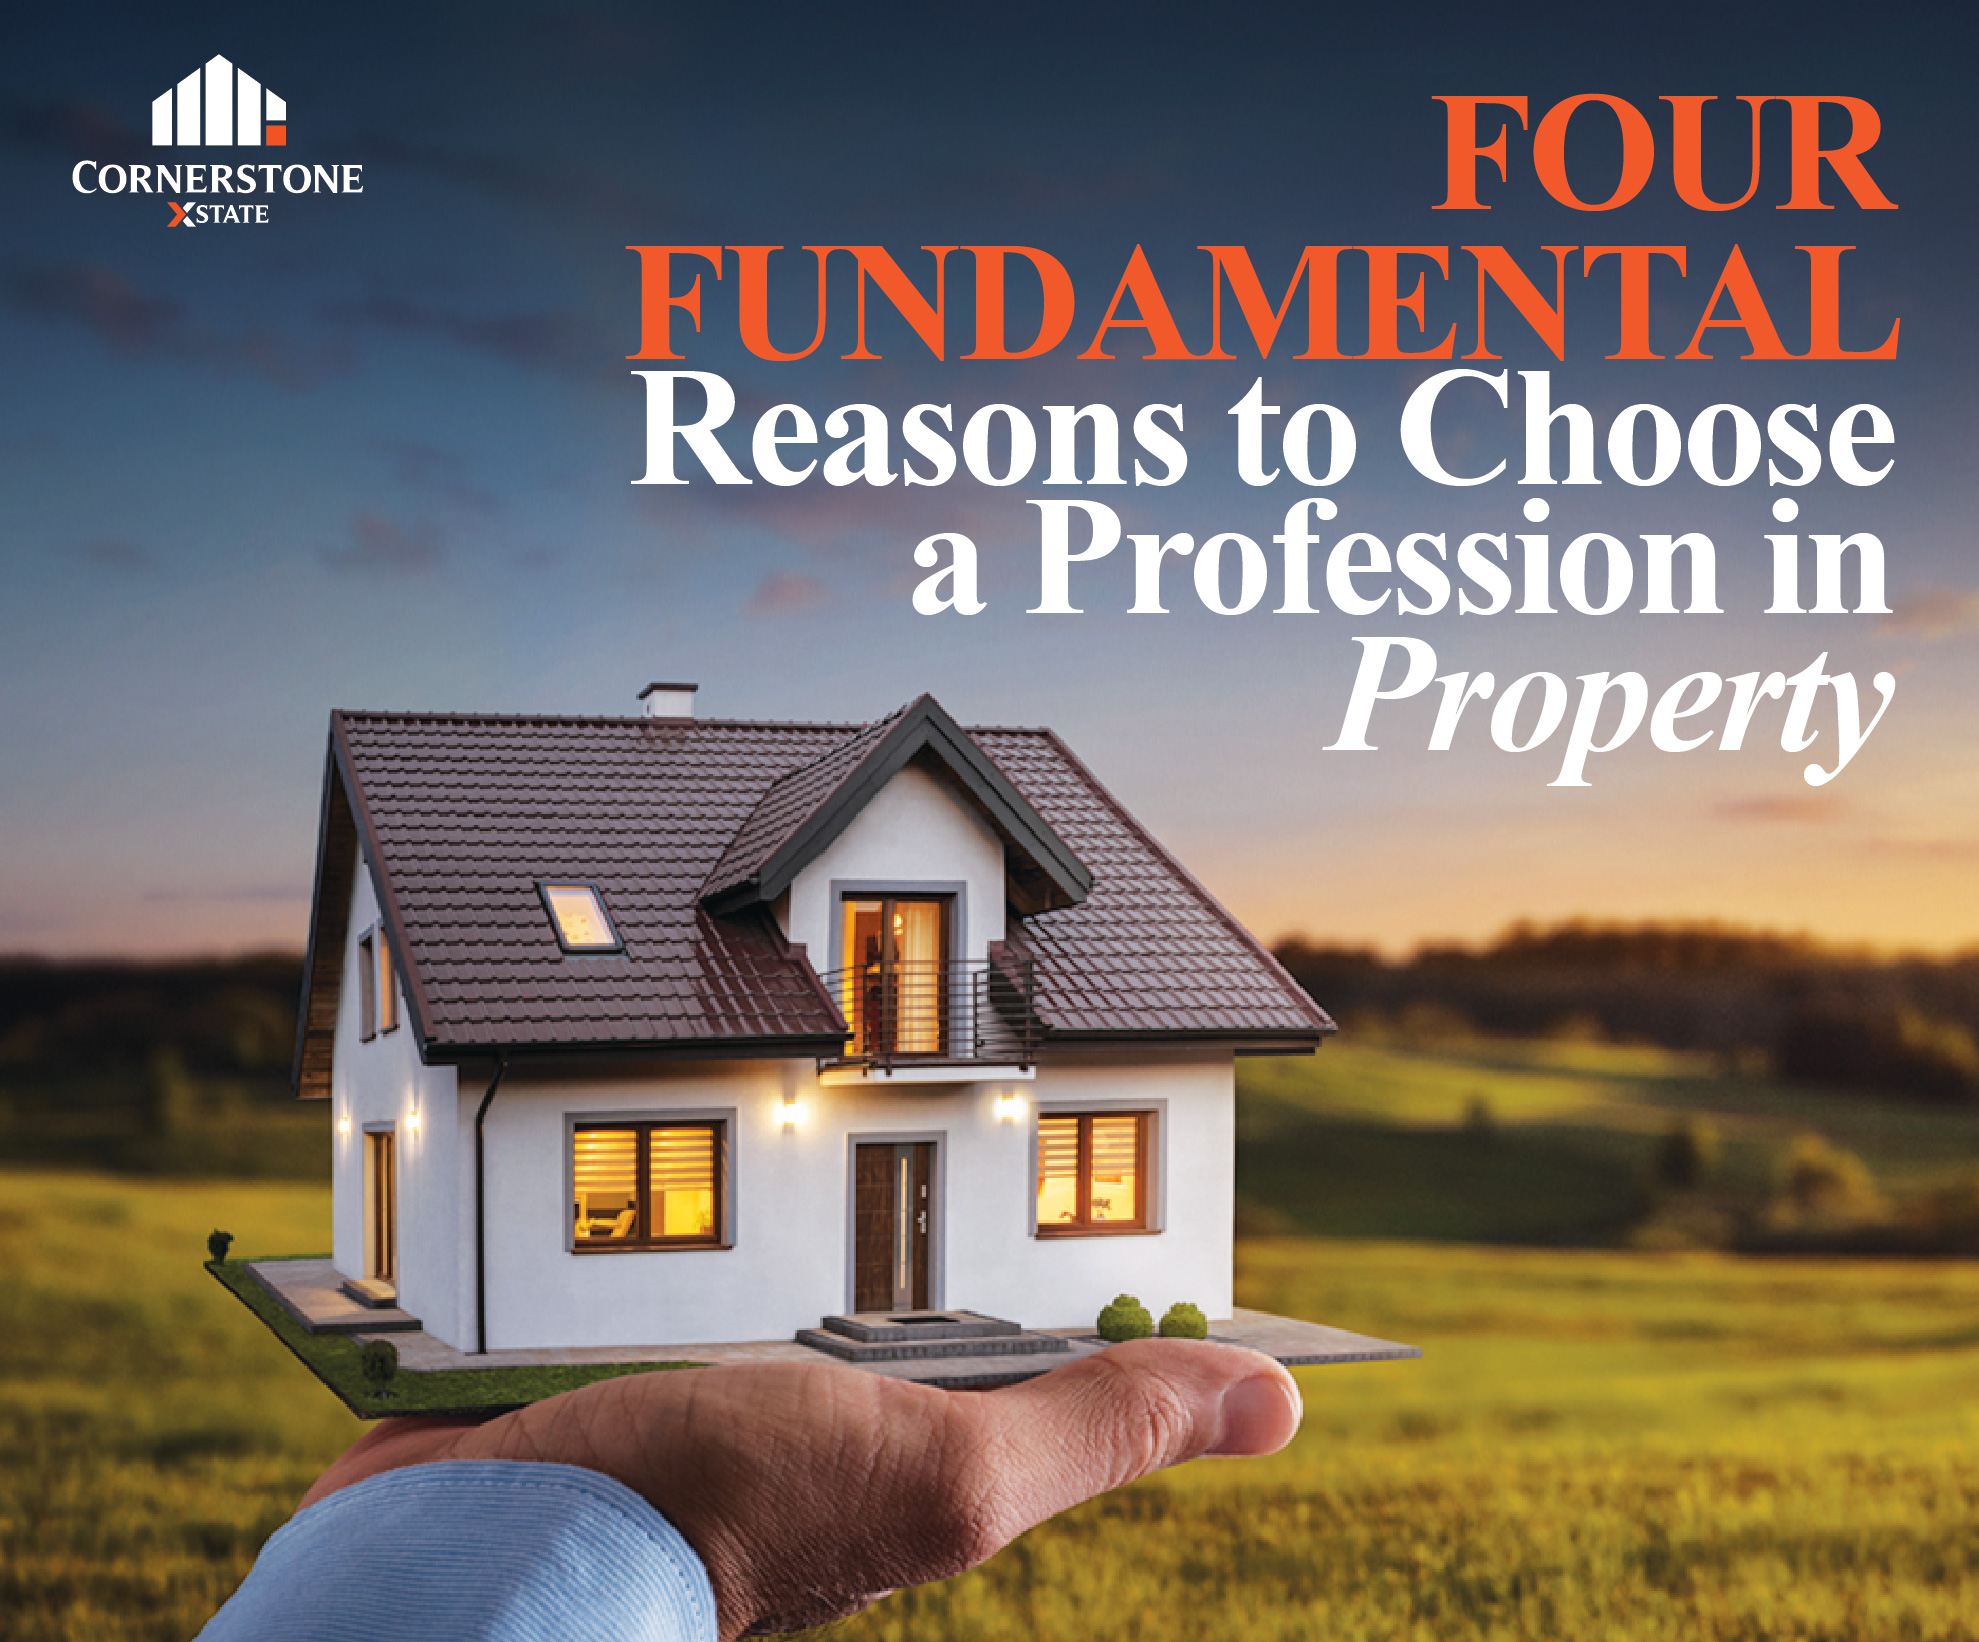 Four Fundamental Reasons to Choose a Profession in Property